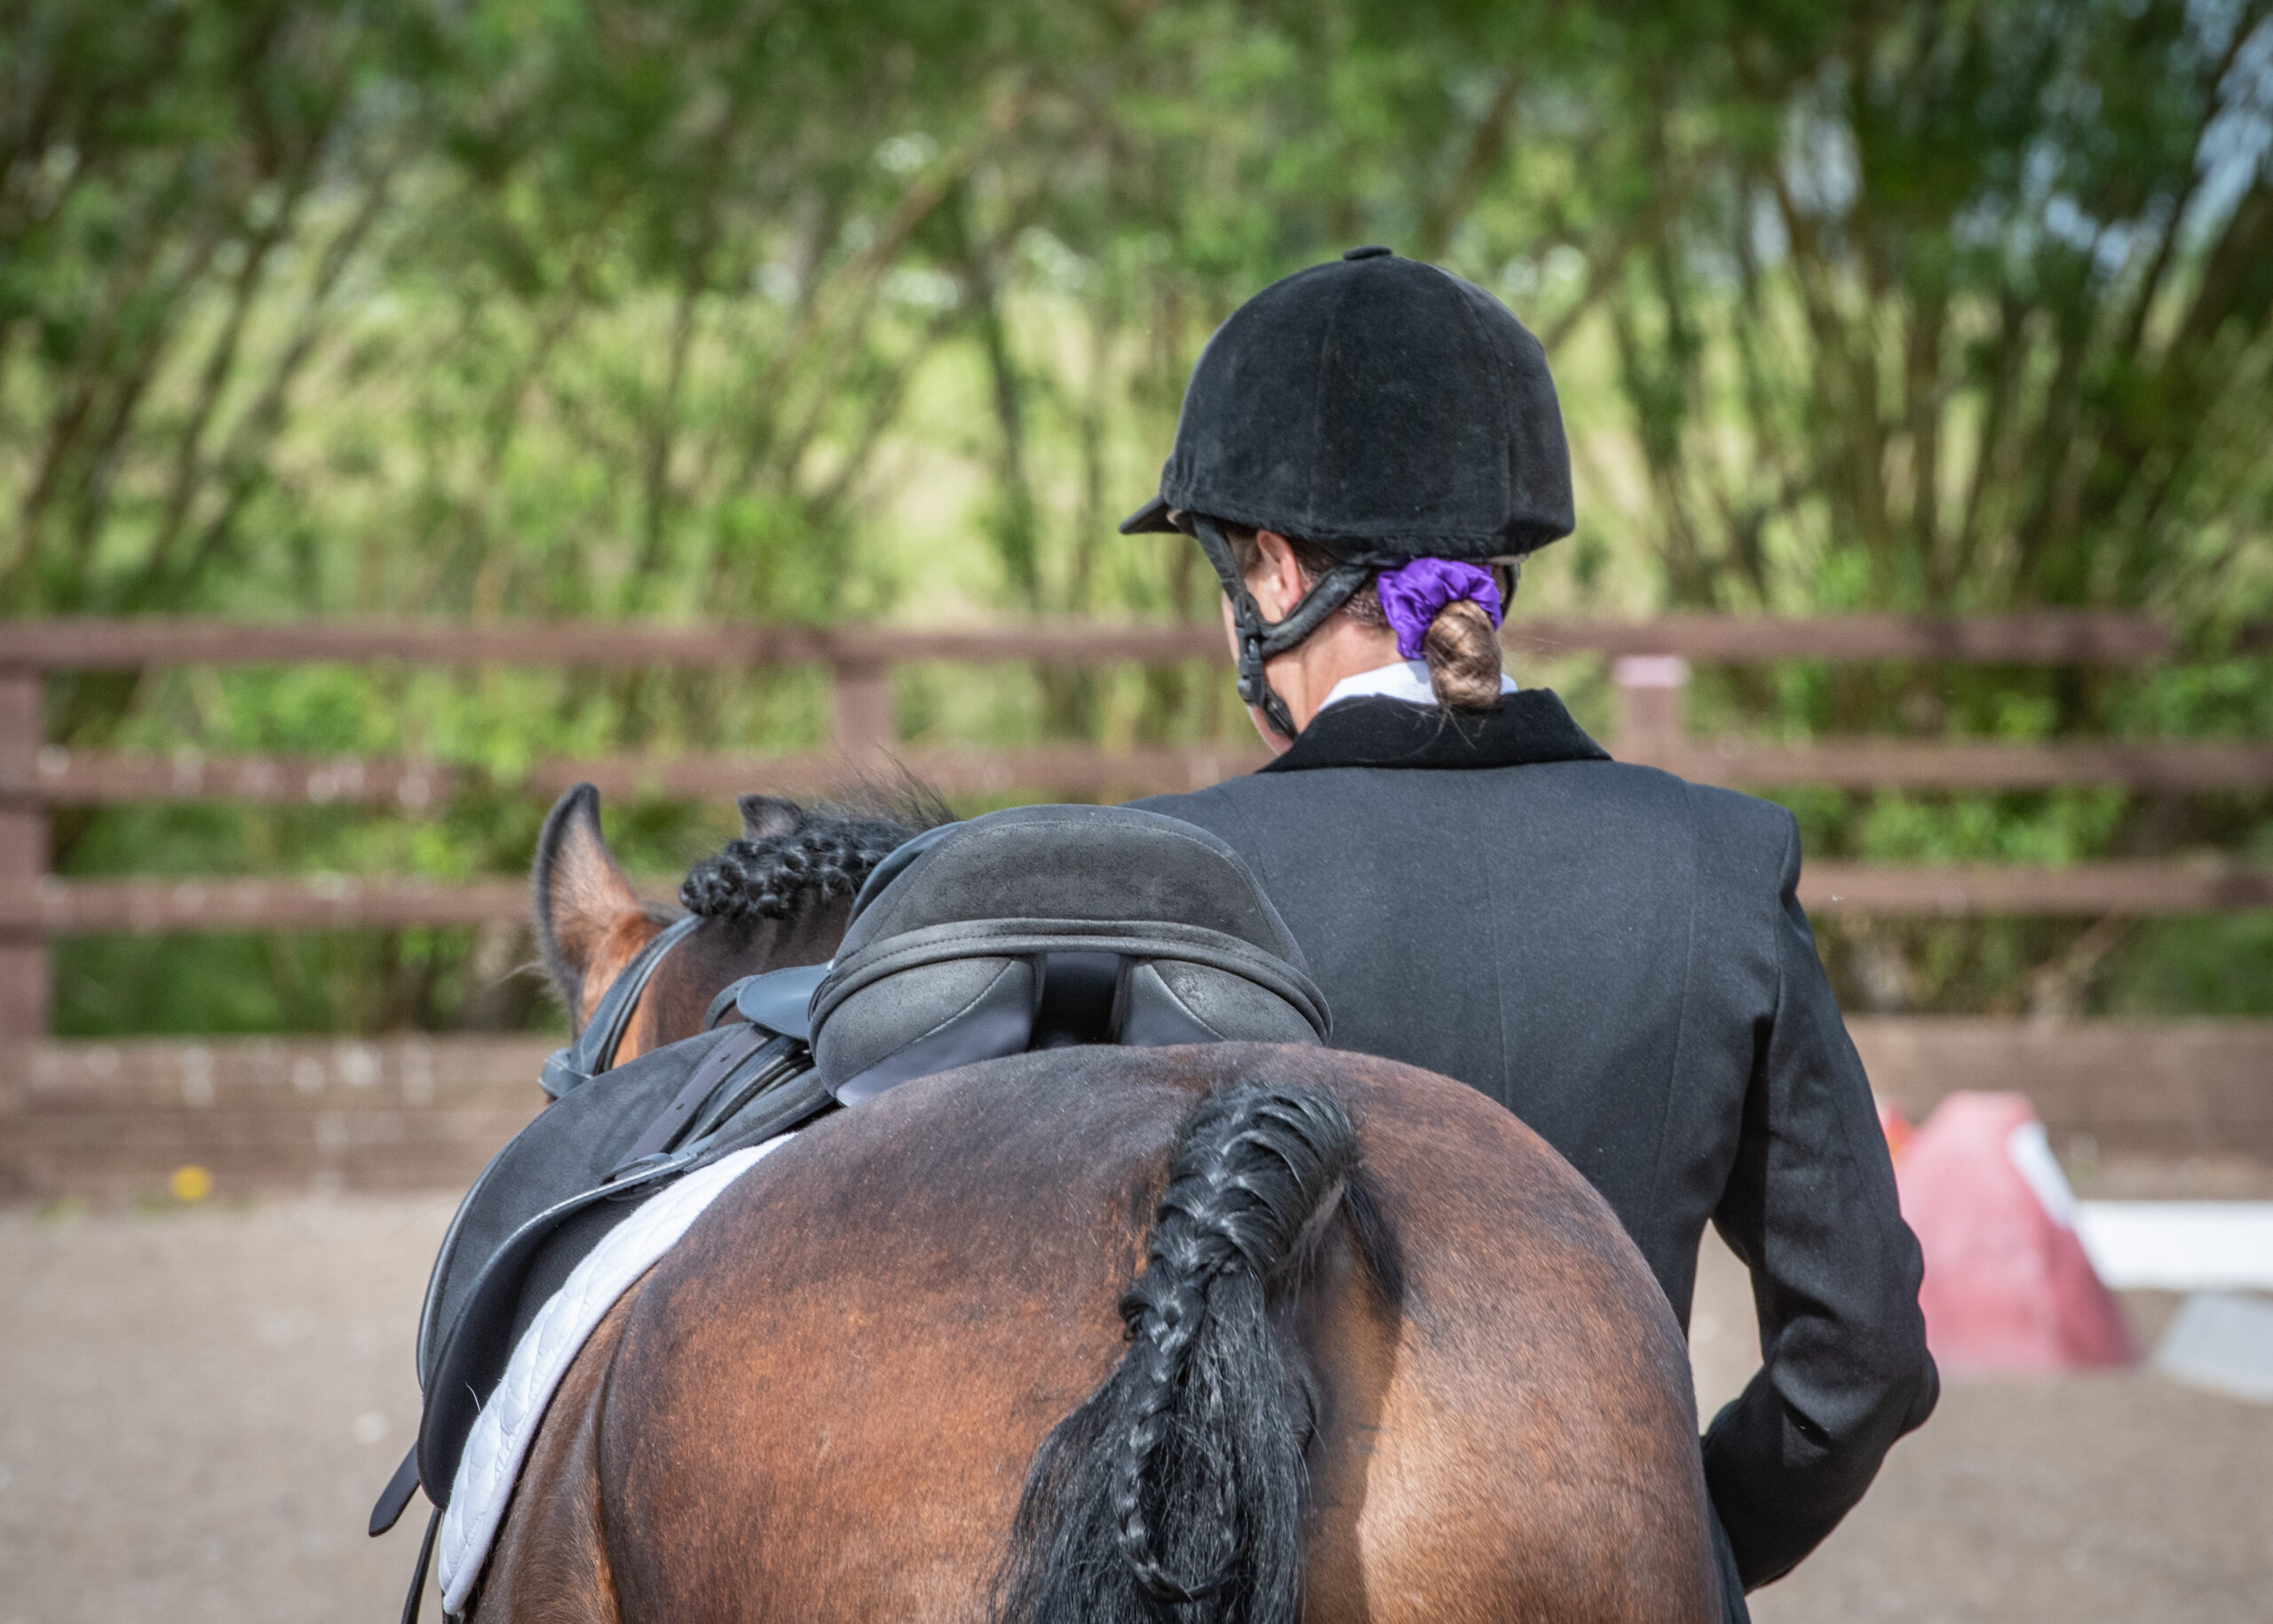 Rider walks with a horse with their backs to the camera. The horse is a bay with a plait in its tail and tacked up. The rider has a purple scrunchie on and wears a smart jacket and hat.